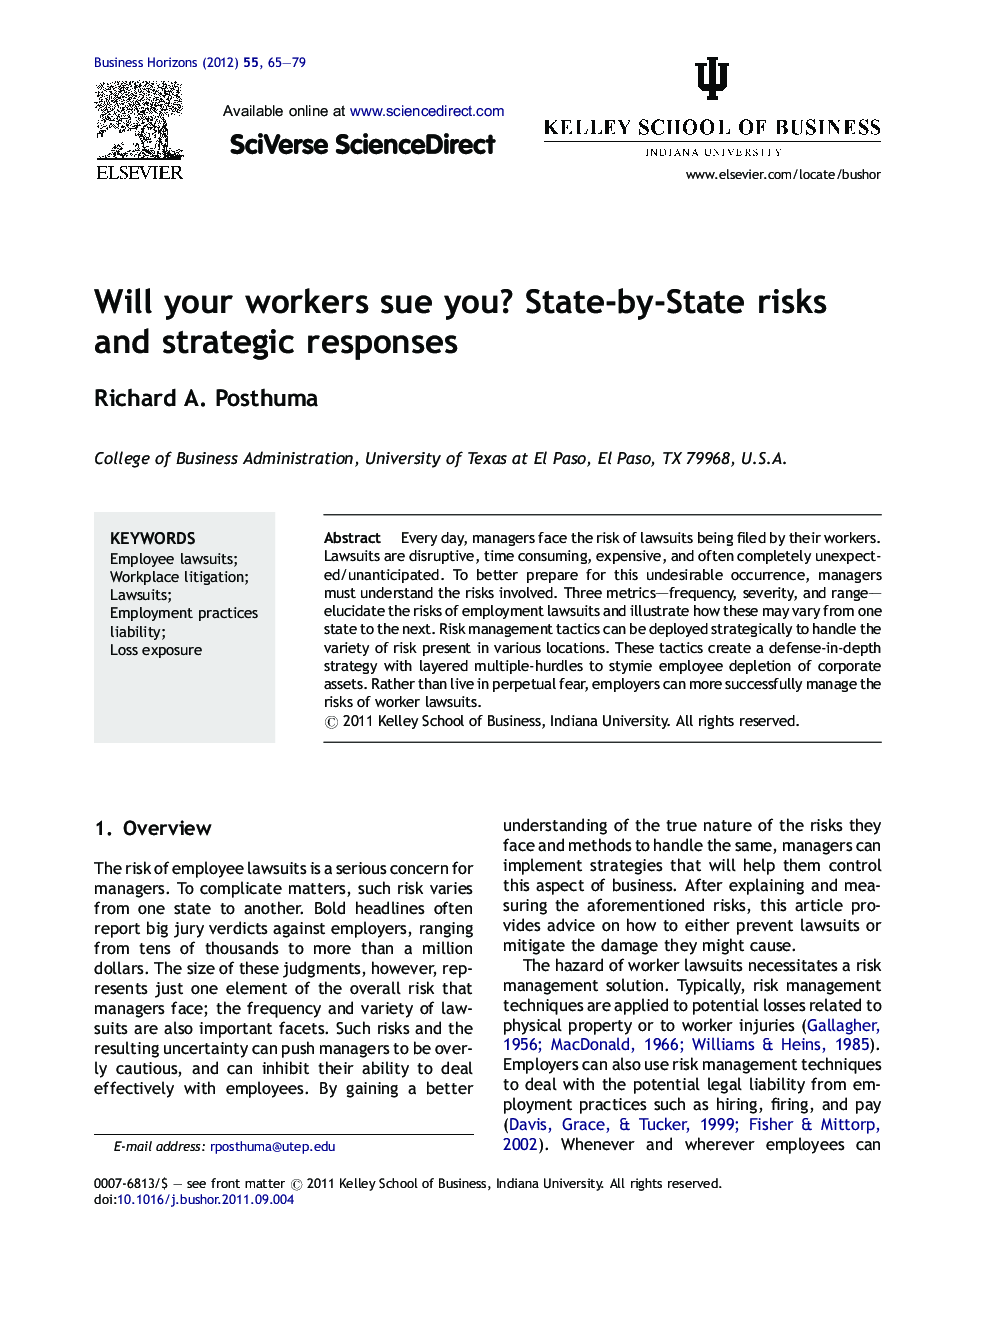 Will your workers sue you? State-by-State risks and strategic responses